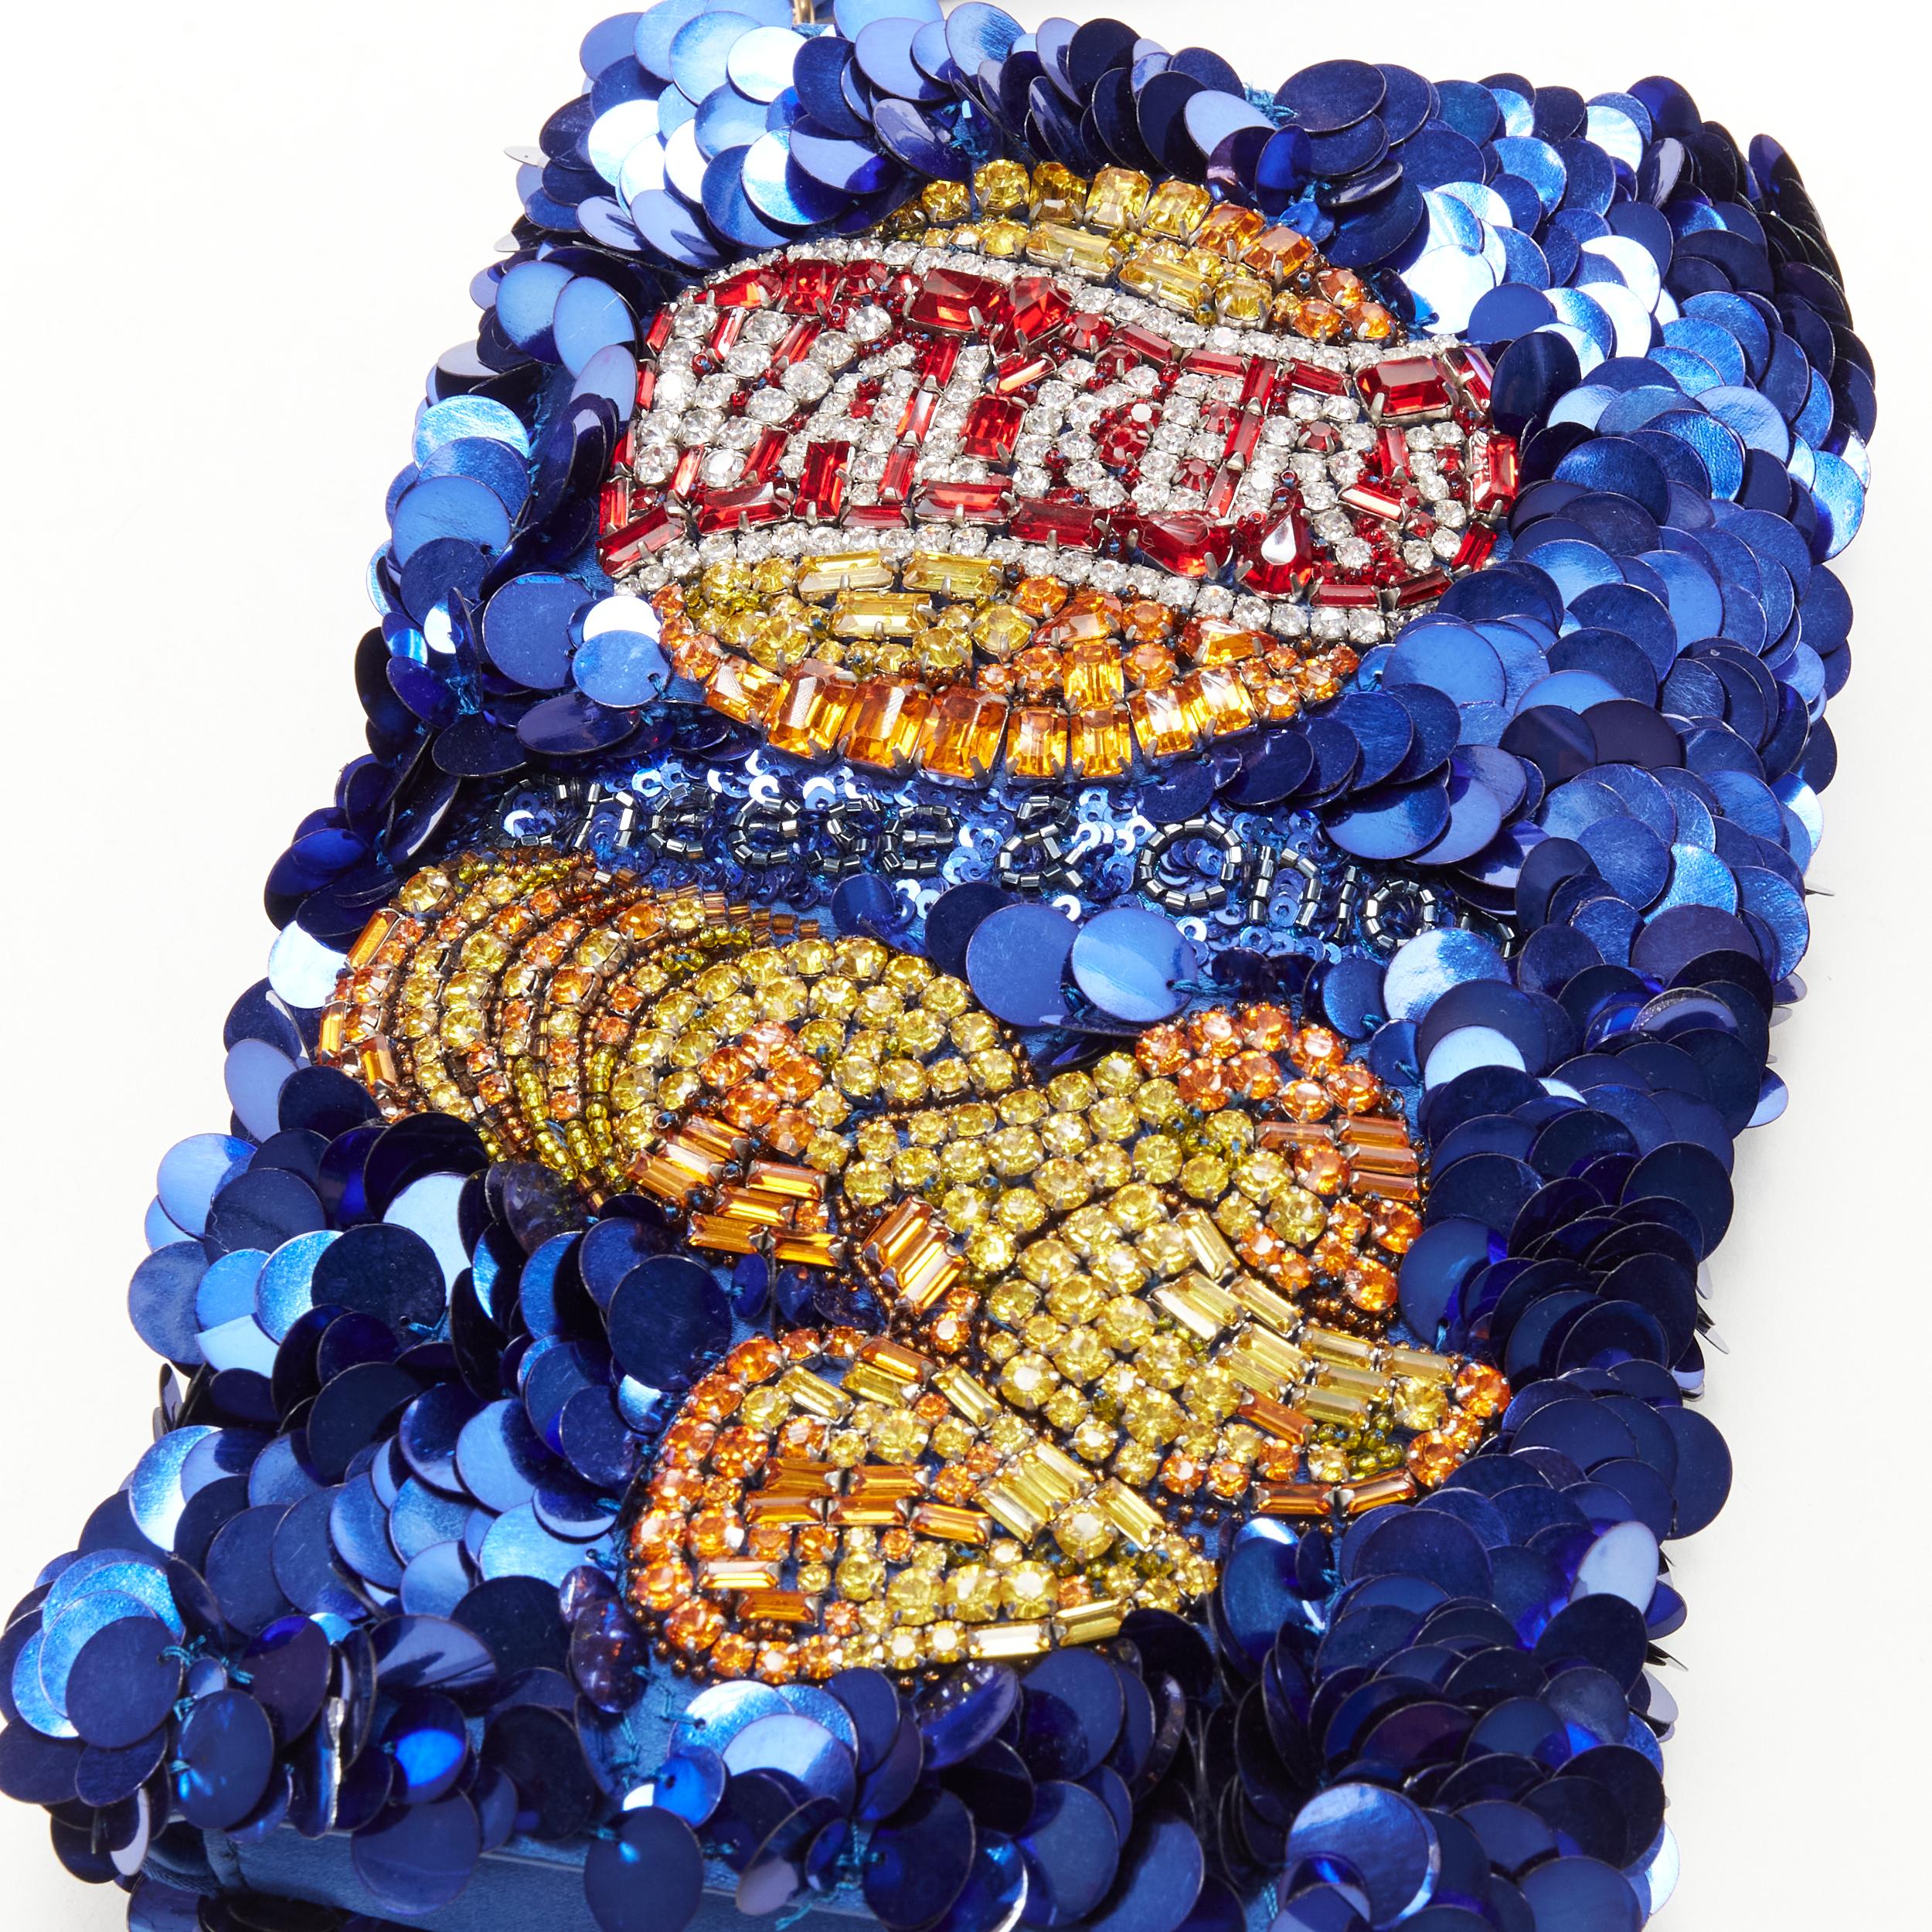 Women's ANYA HINDMARCH Walkers Cheese Onion Chips blue sequins crystal clutch bag